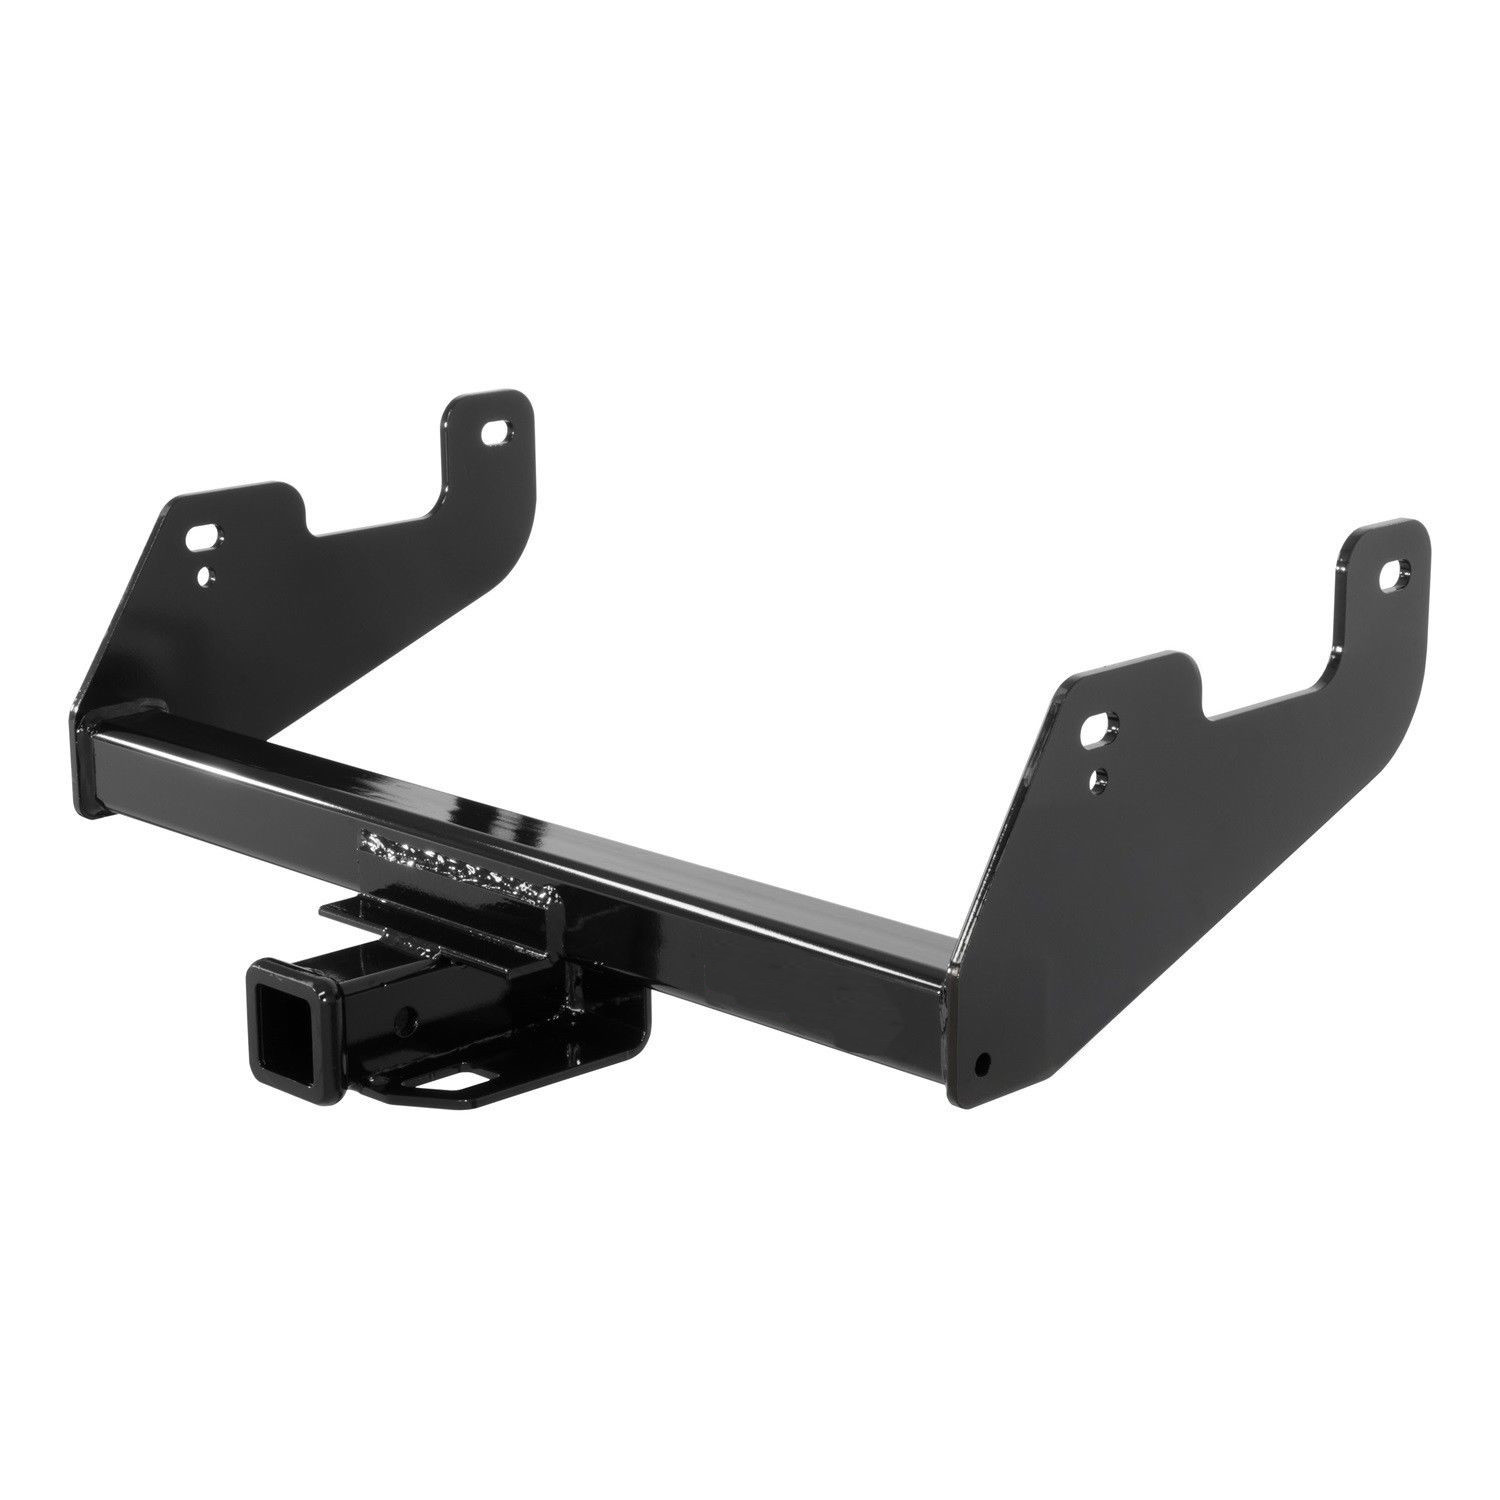 Steel Tow Bar Truck Hitch Receiver Black Color For Ford F150 2015 - 2018